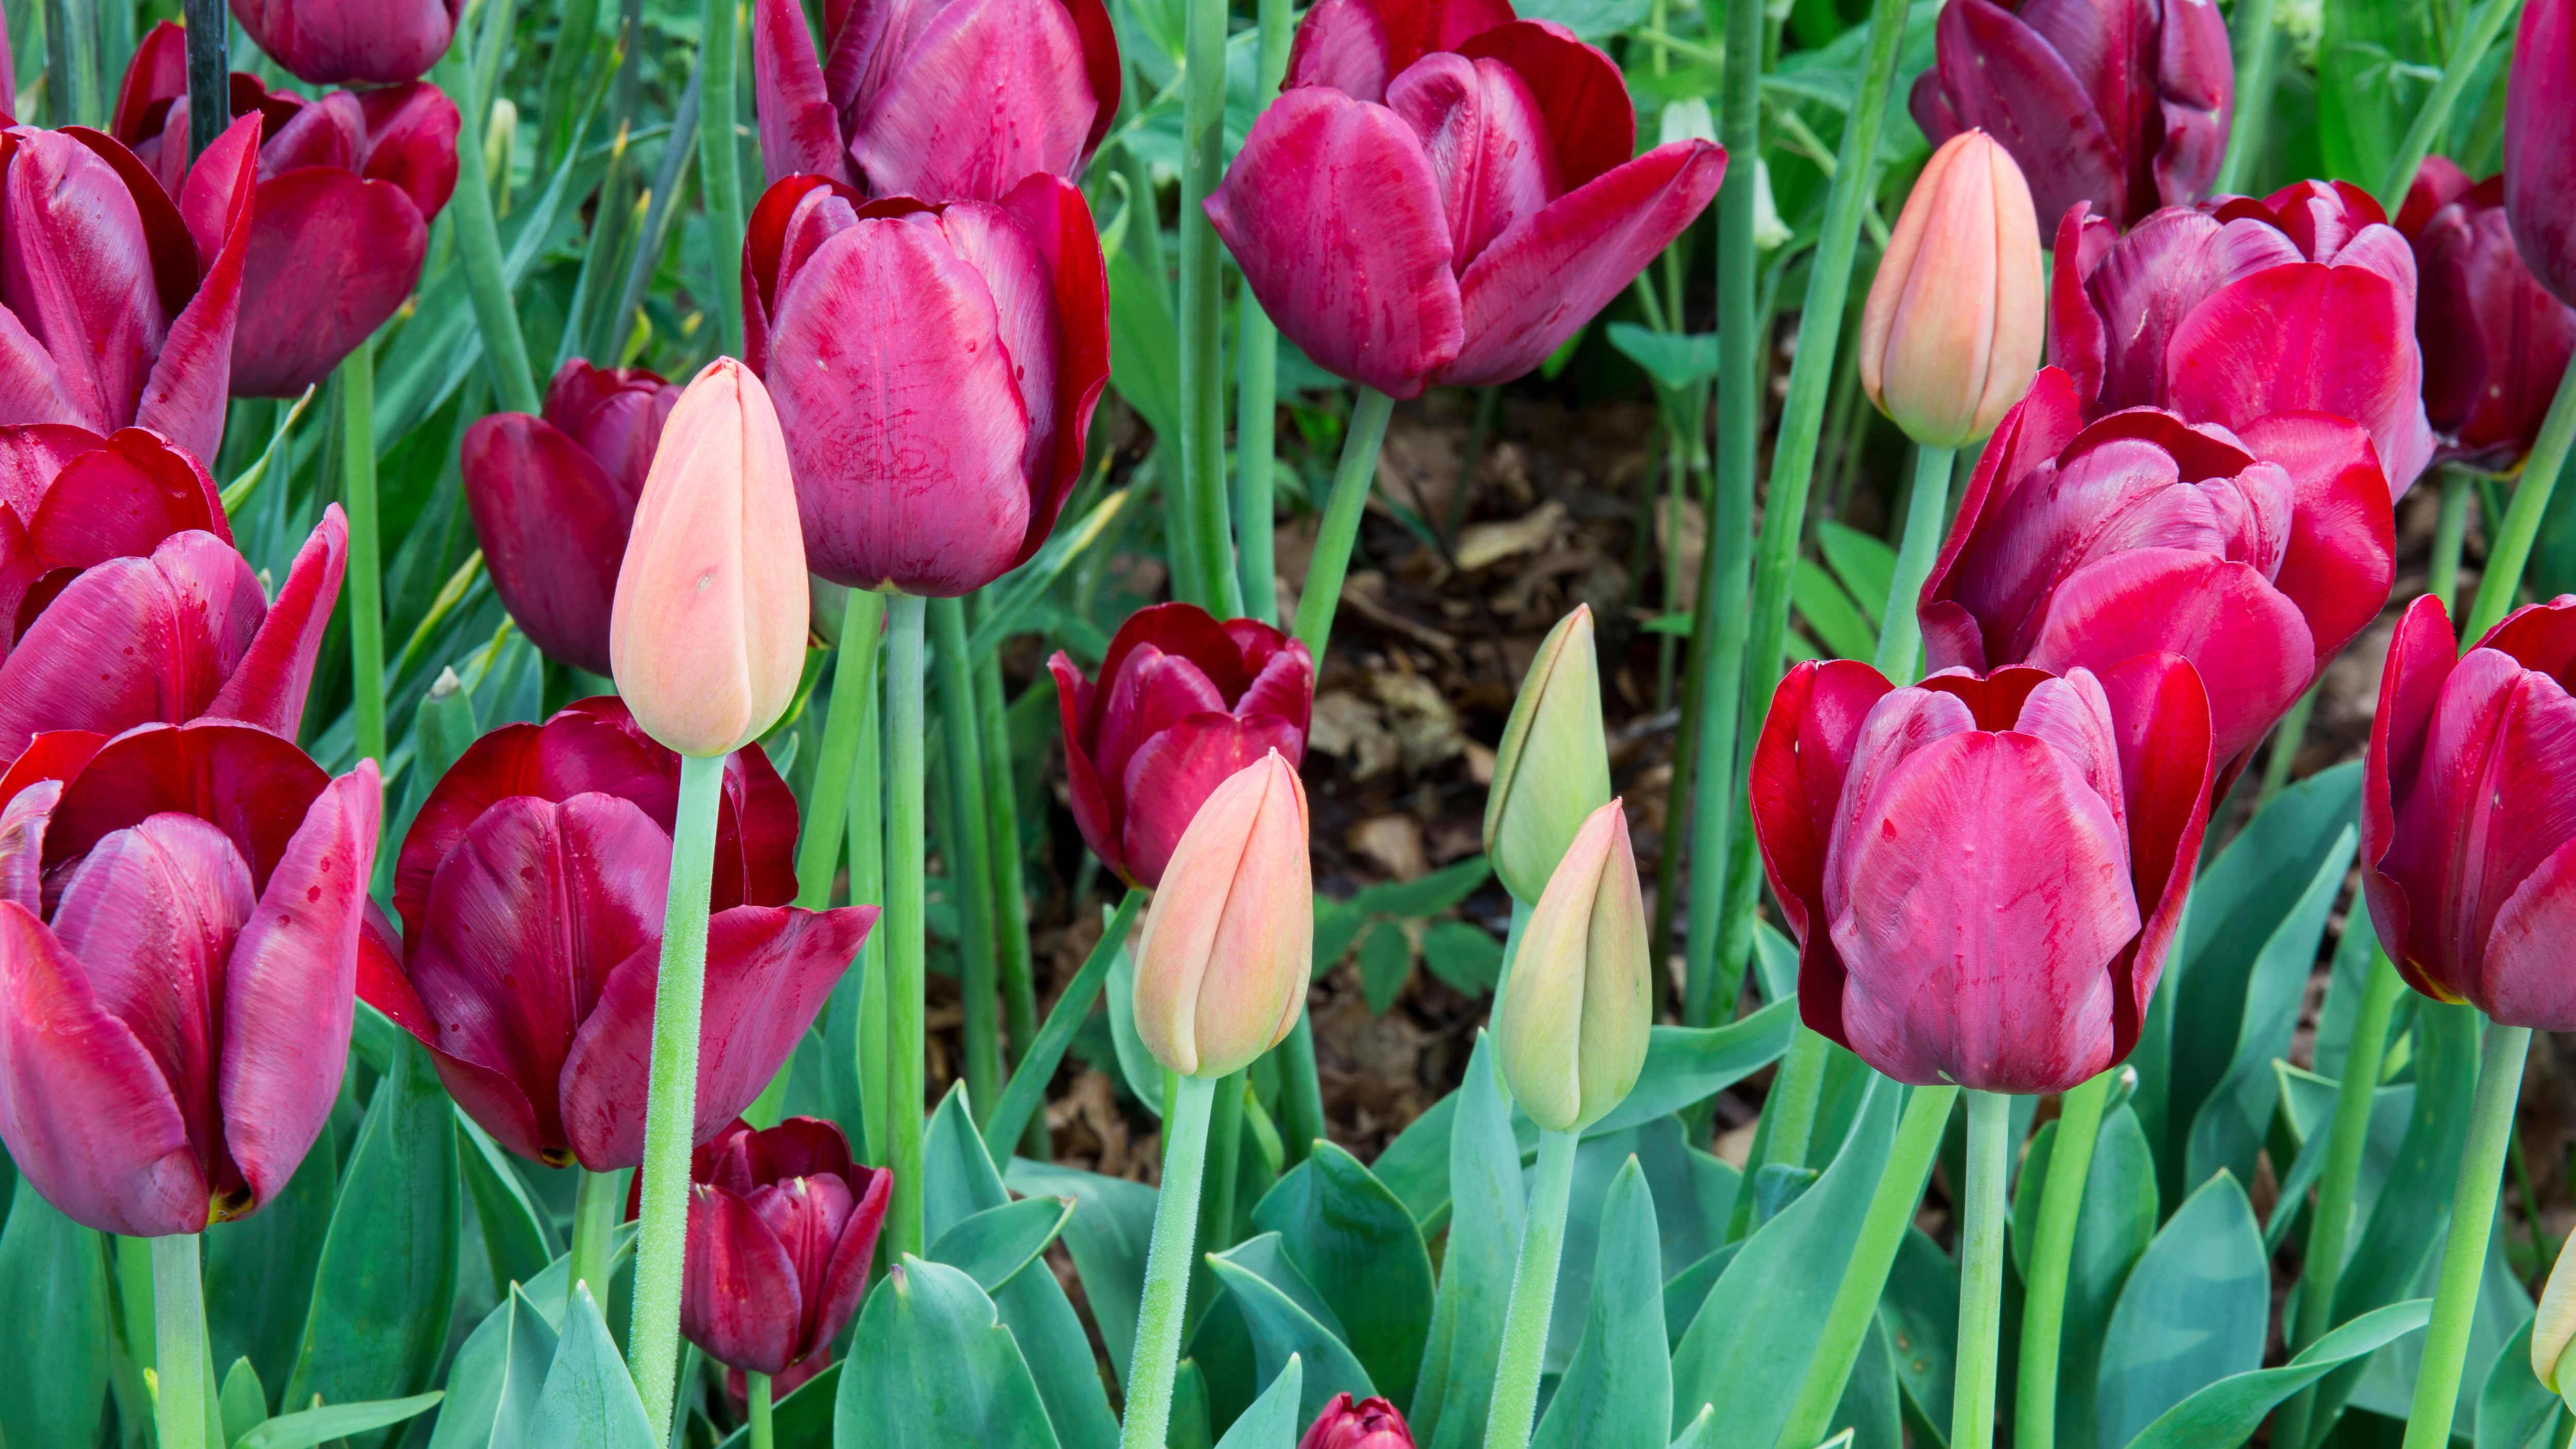 A Kew horticulturist offers tips on whether it’s worth lifting your tulips